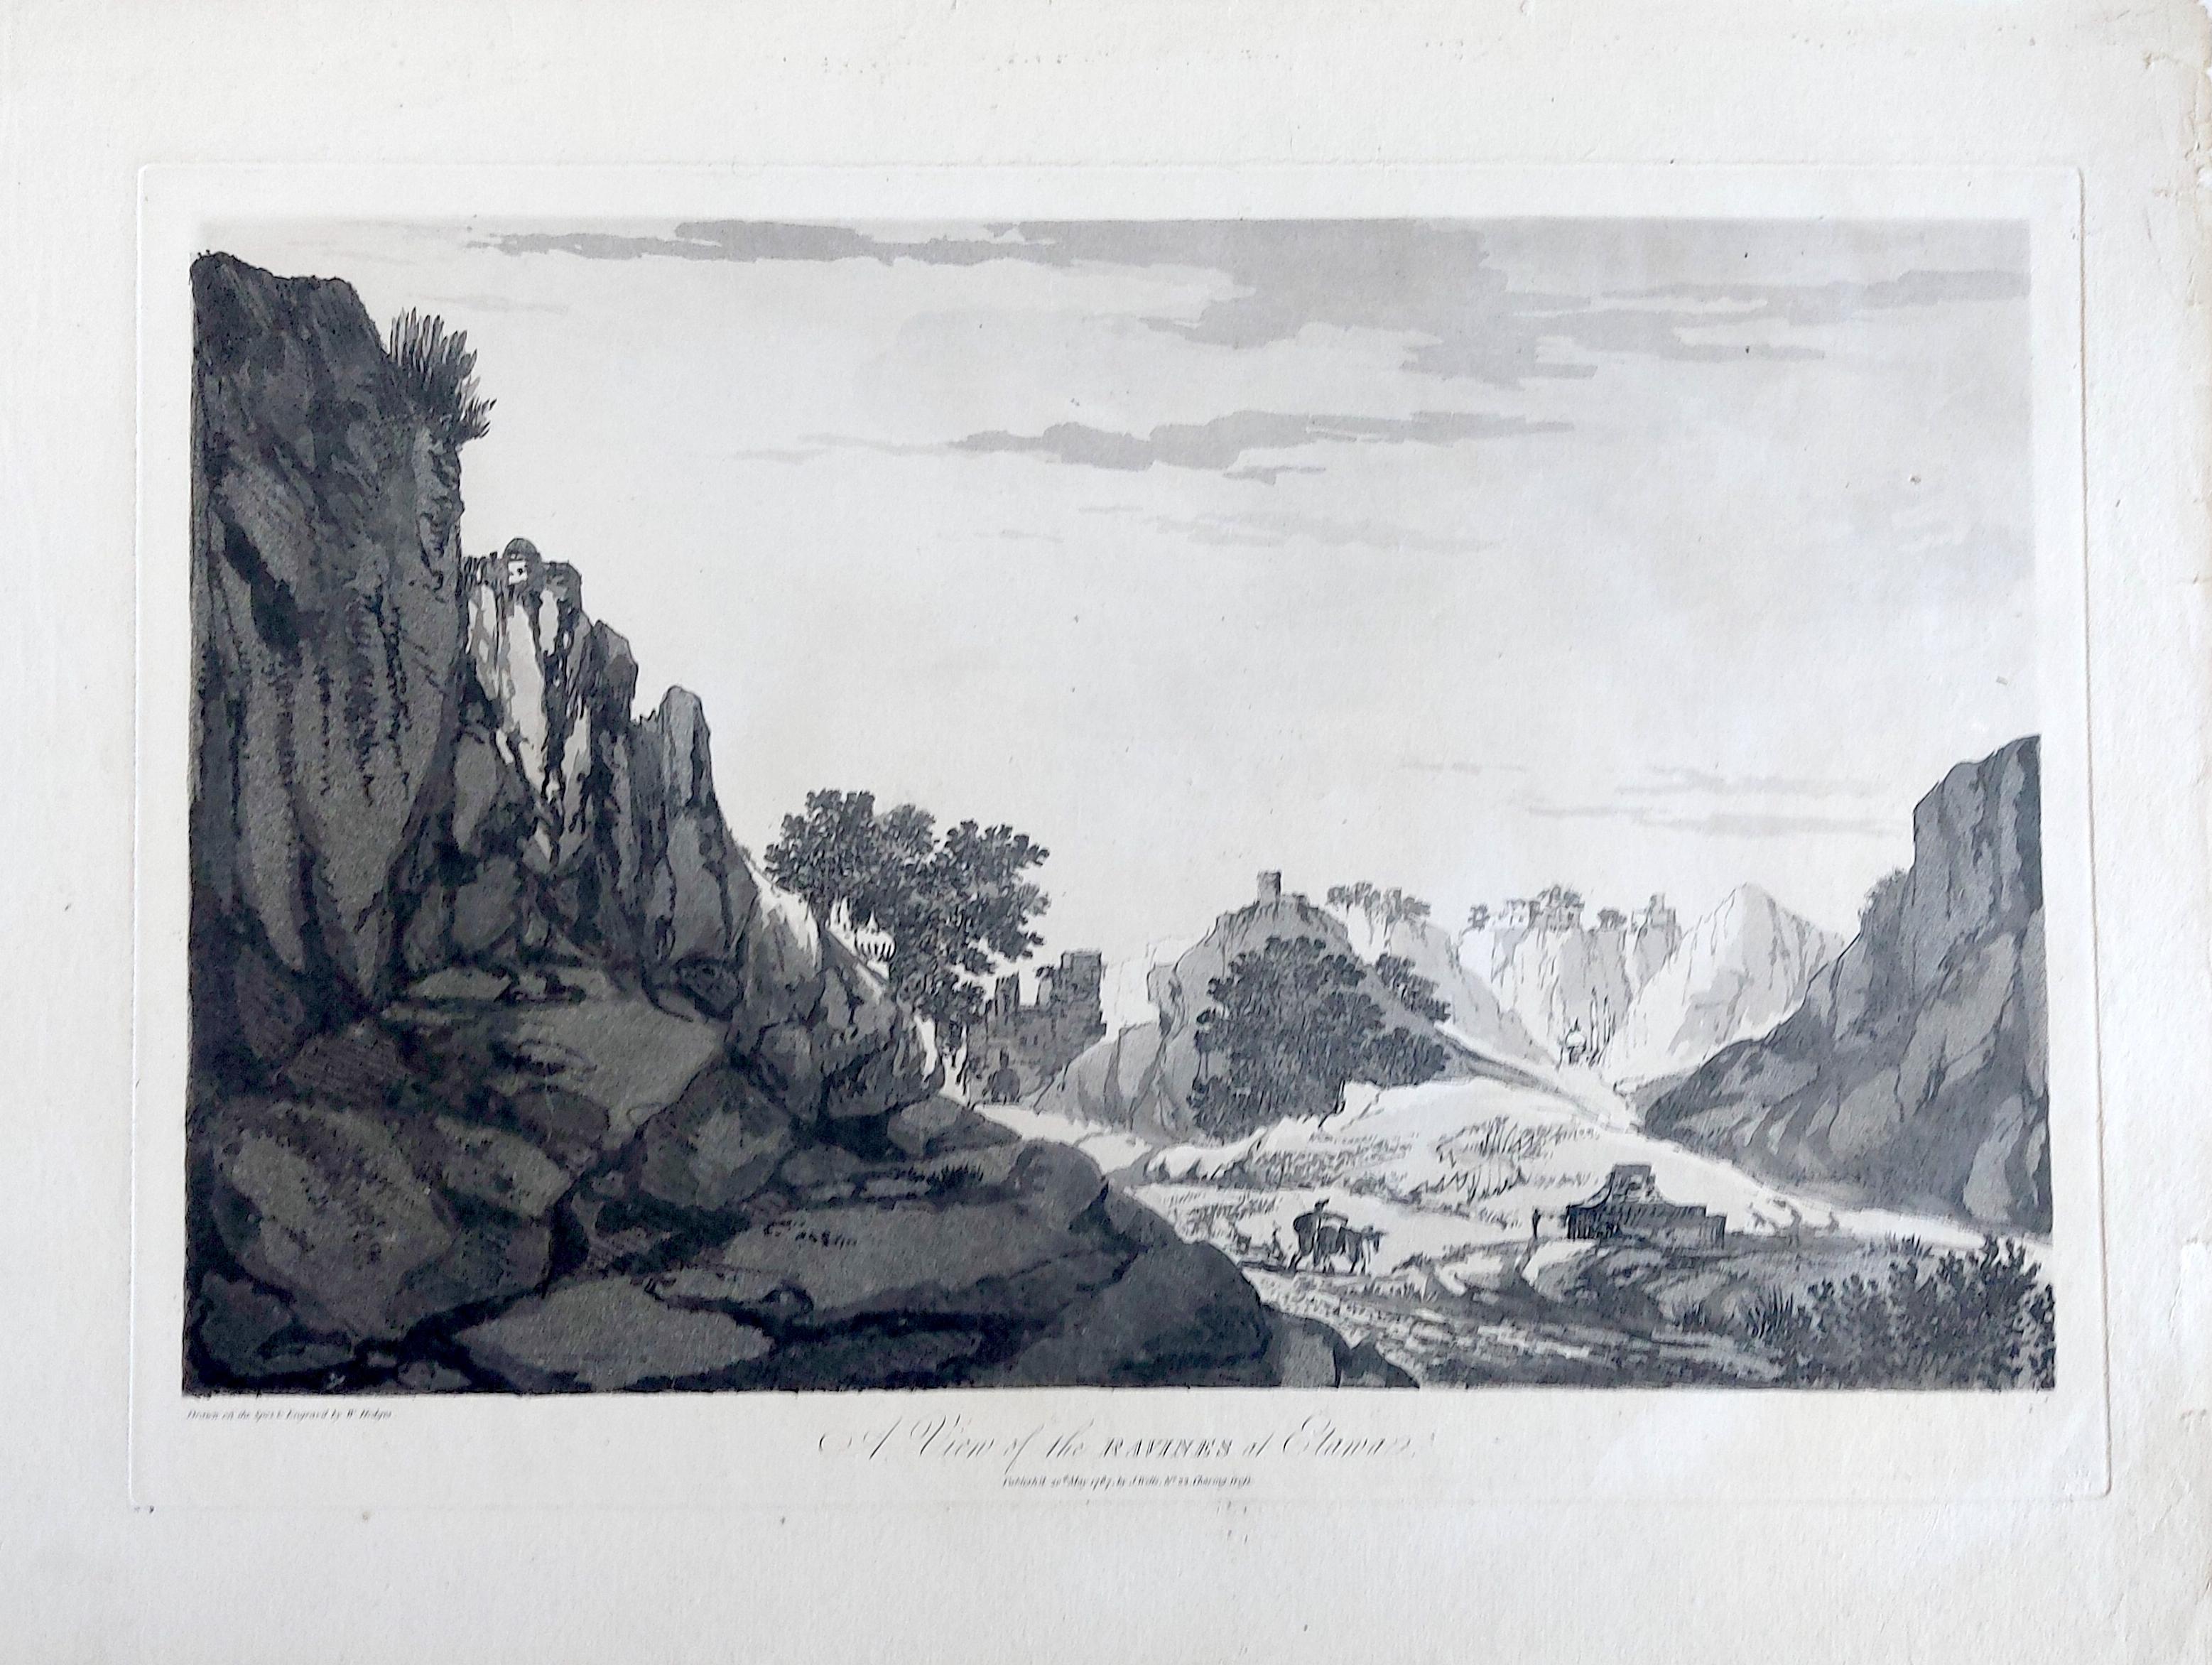 India William Hodges 'A View of the Ravines at Etana' Early India Engraving 